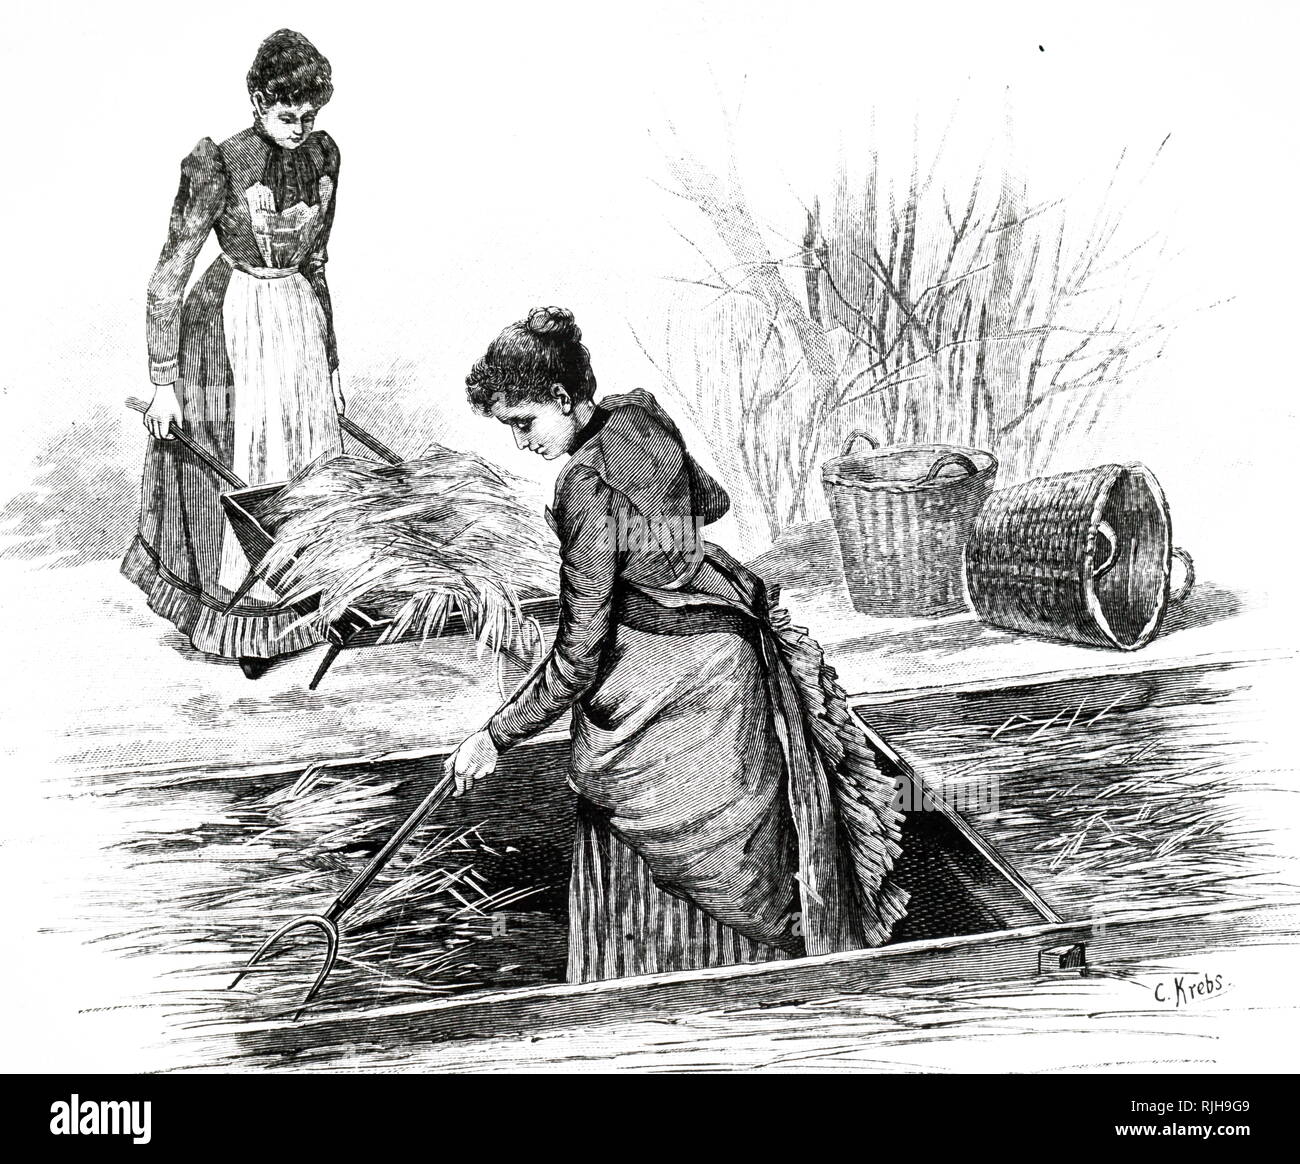 An engraving depicting female gardeners preparing hotbeds. At this date, establishments were being set up in France, Germany and Britain to give women sound training which would enable them to earn a living as market gardeners or as gardeners in private employment. Dated 19th century Stock Photo